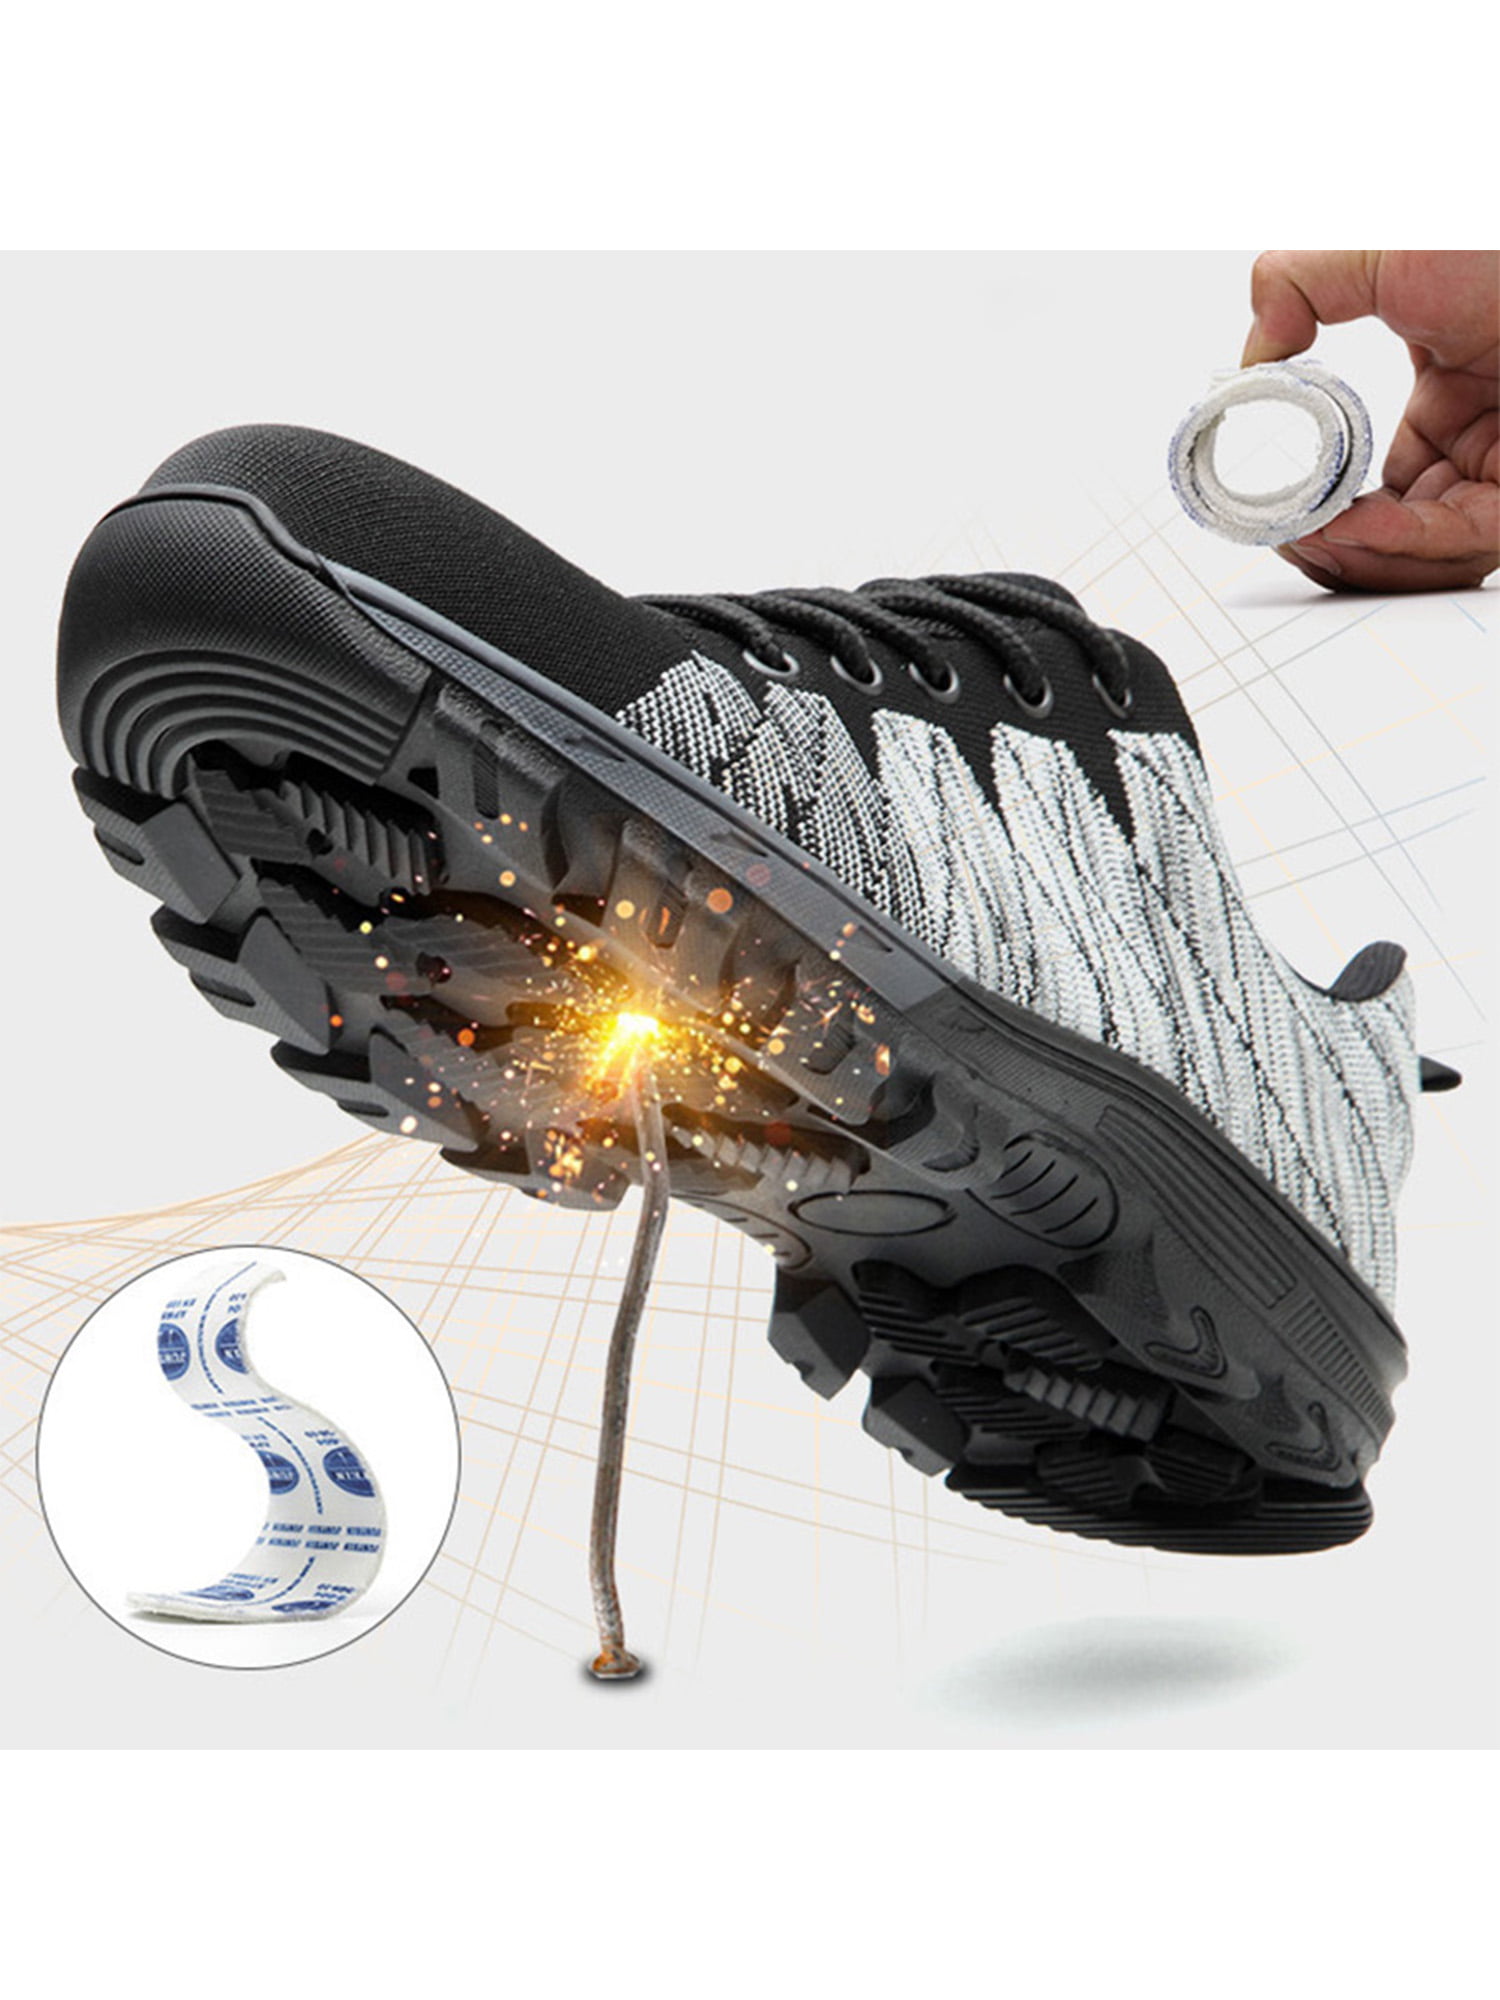 Details about   Mens Blue Lace up Indestructible Safety Shoes Steel Toe Sneaker Work Boots Size 